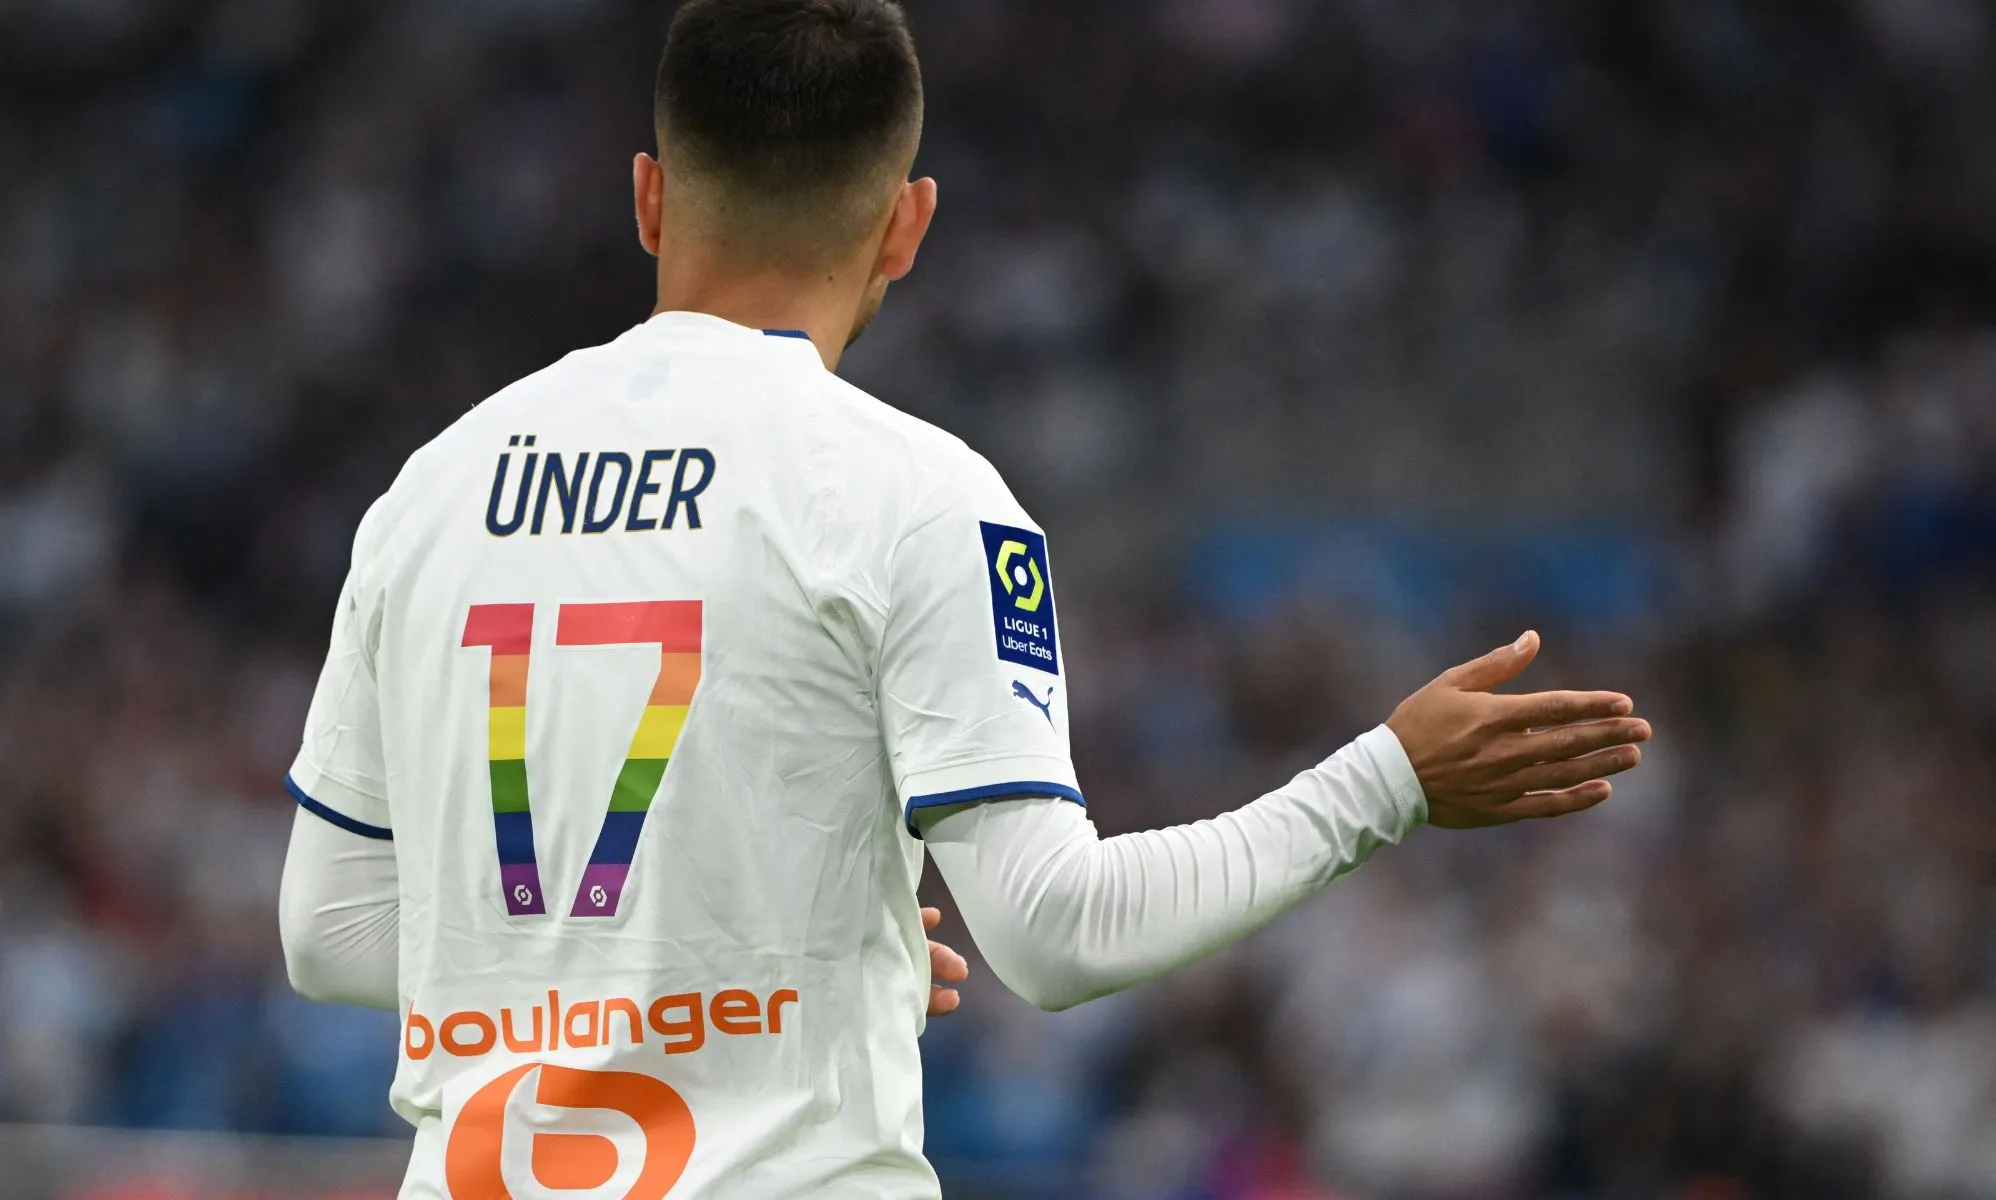 PSG wear special rainbow flag numbering on shirts as Ligue 1 acknowledges  International Day Against Homophobia